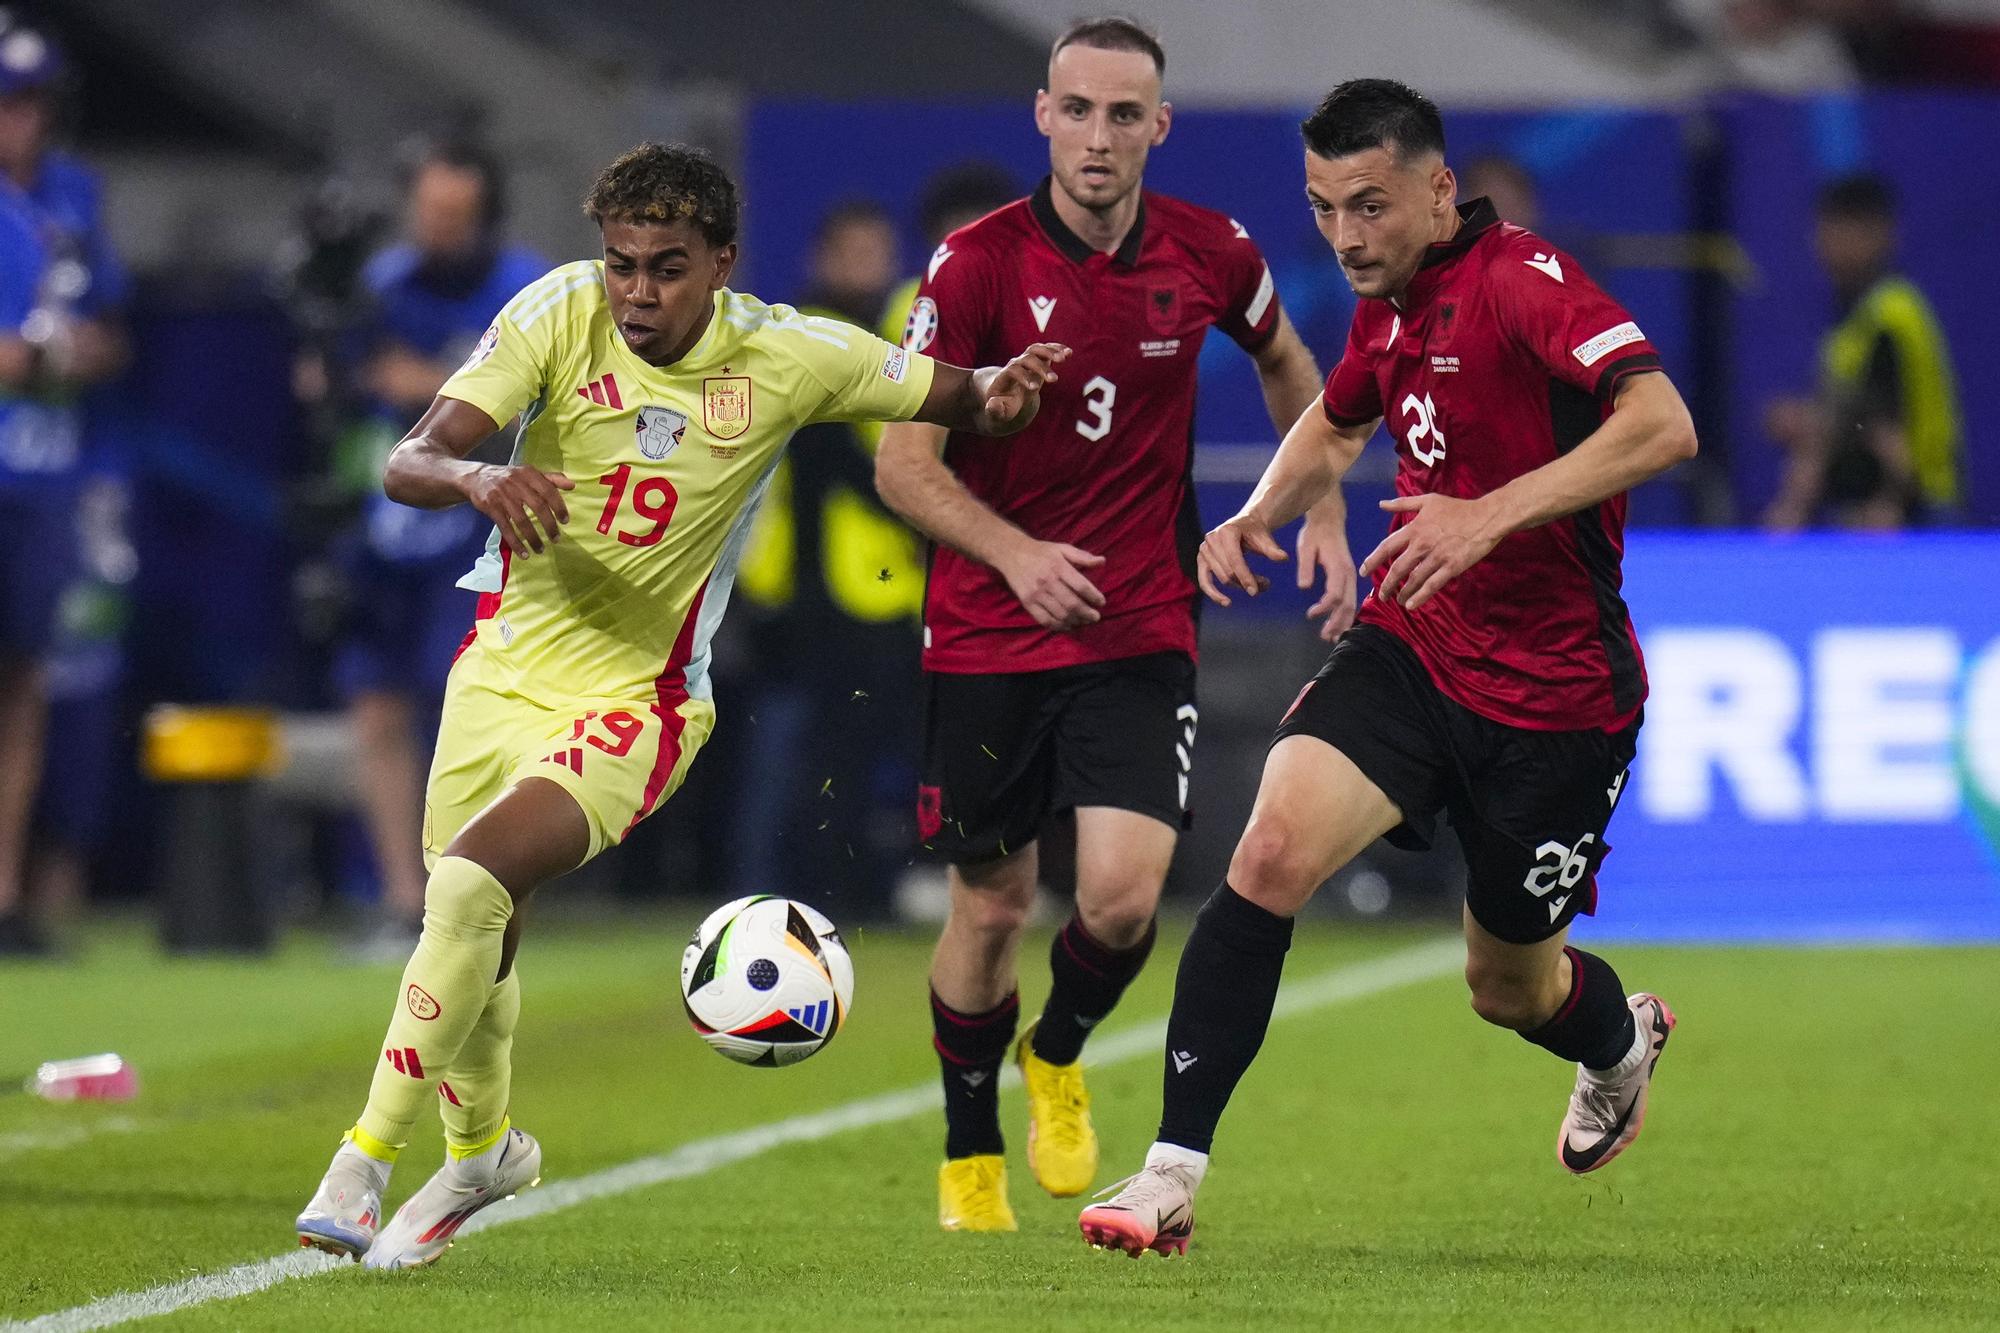 Spain's Lamine Yamal, left, vies for the ball with Albania's Arber Hoxha during a Group B match between Albania and Spain at the Euro 2024 soccer tournament in Duesseldorf, Germany, Monday, June 24, 2024. Spain won 1-0. (AP Photo/Manu Fernandez) / EDITORIAL USE ONLY / ONLY ITALY AND SPAIN